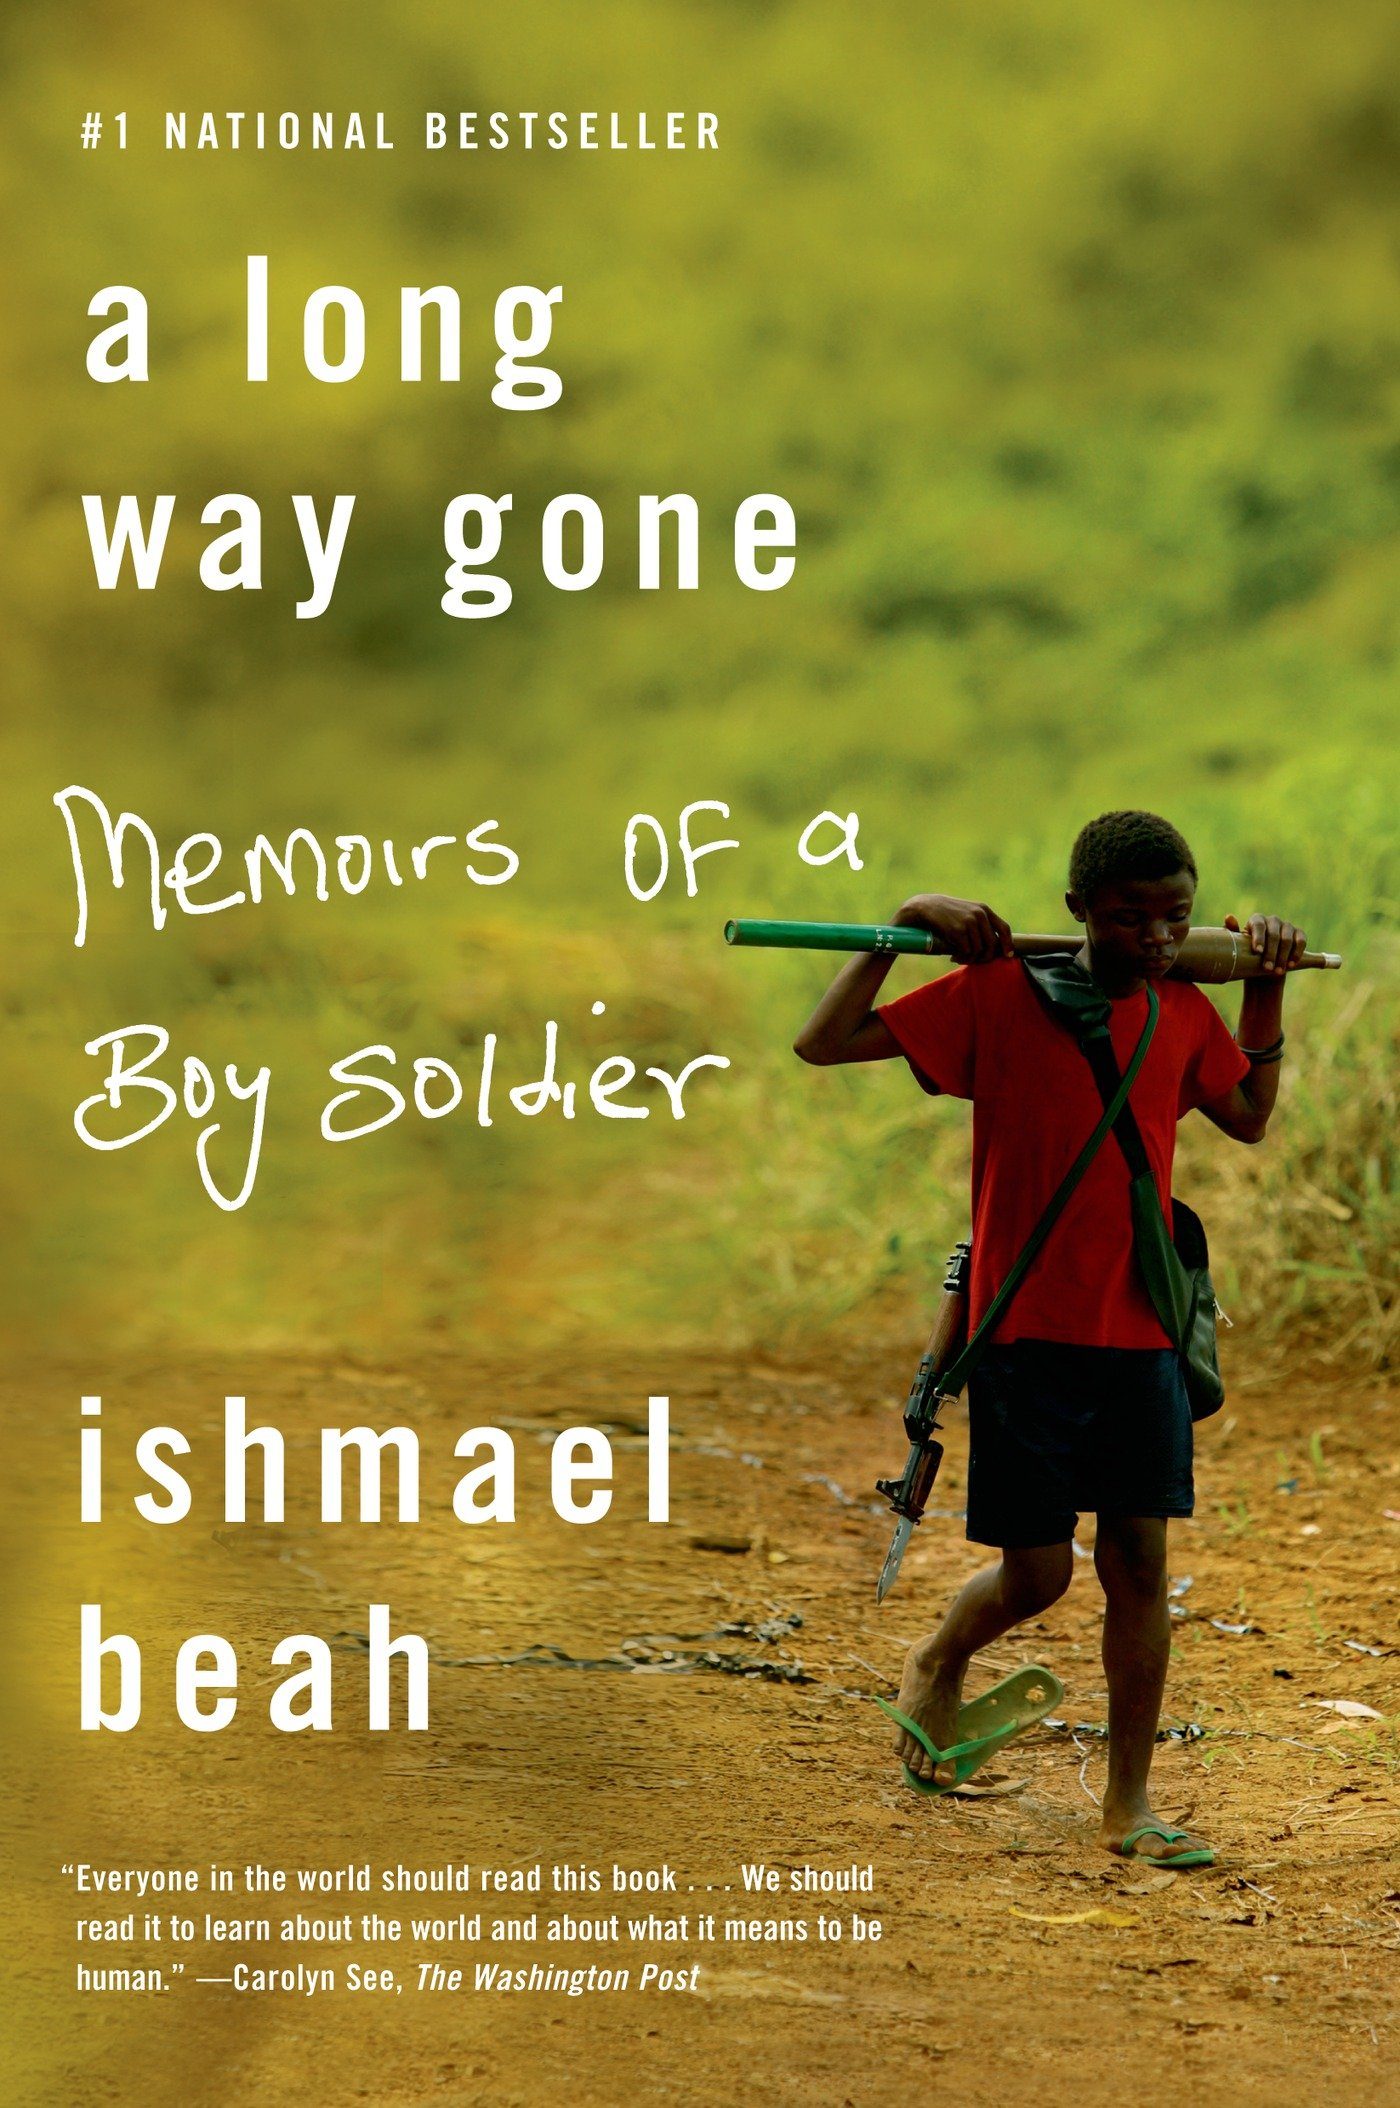 a long way gone- memoirs of a boy soldier